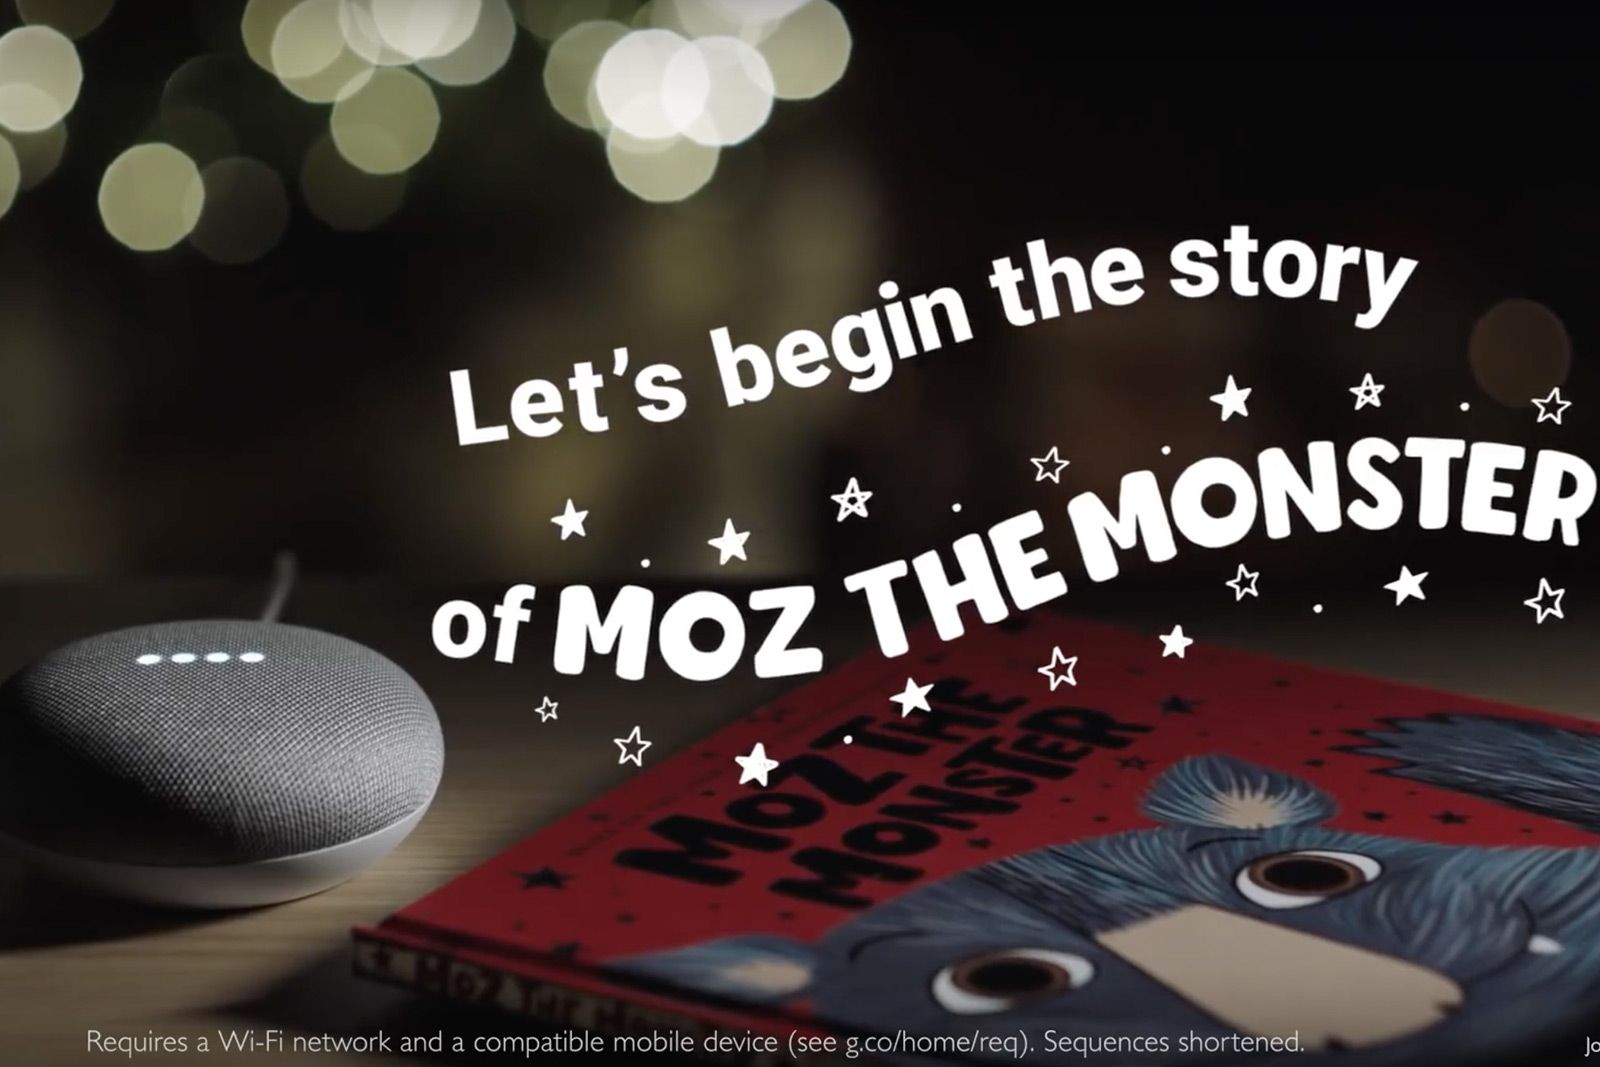 John Lewis and Google bring Moz the Monster to life with interactive storybook image 1